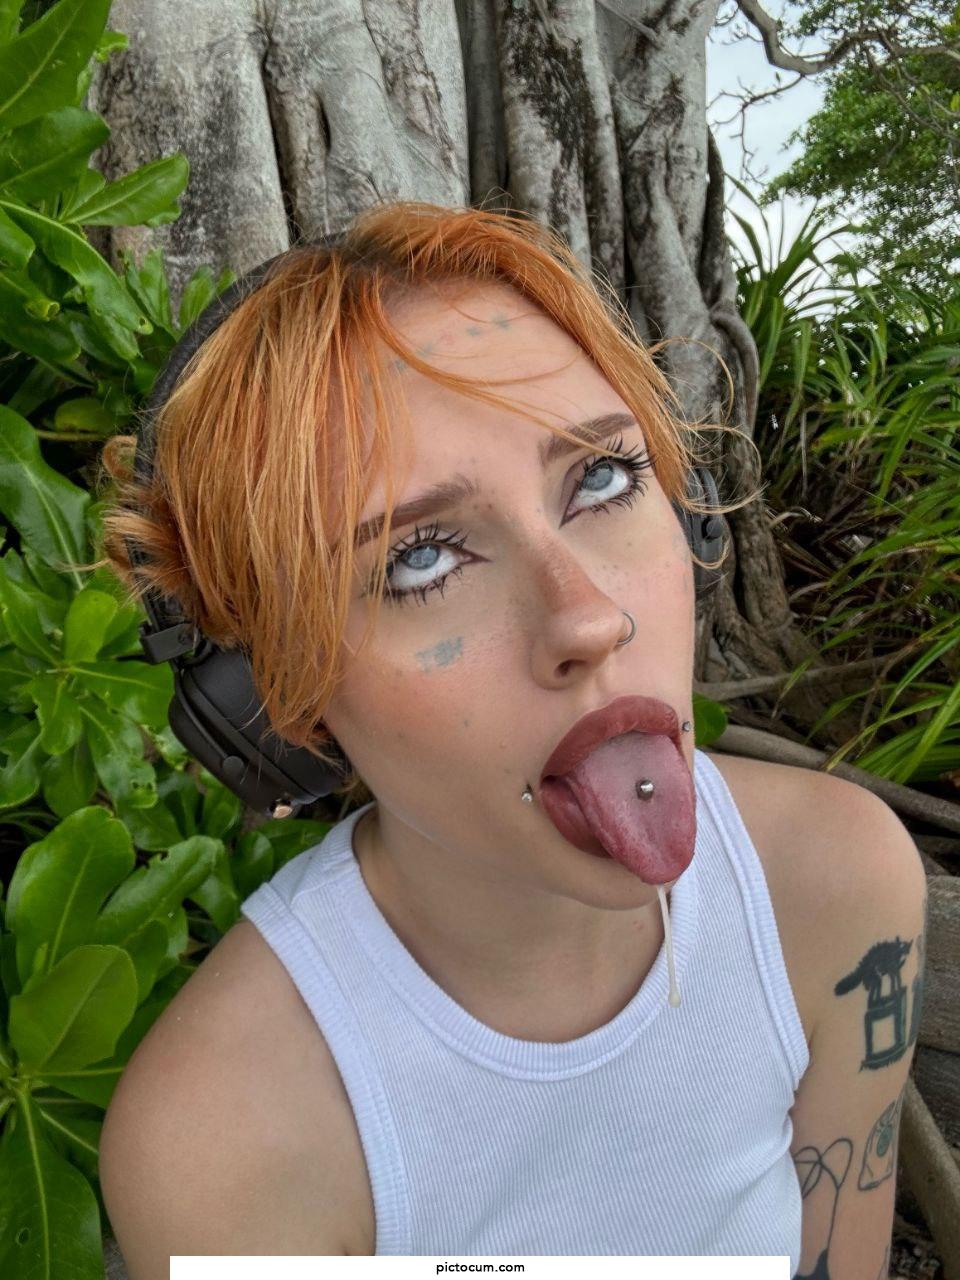 my ahegao looks very sexy, doesn't it